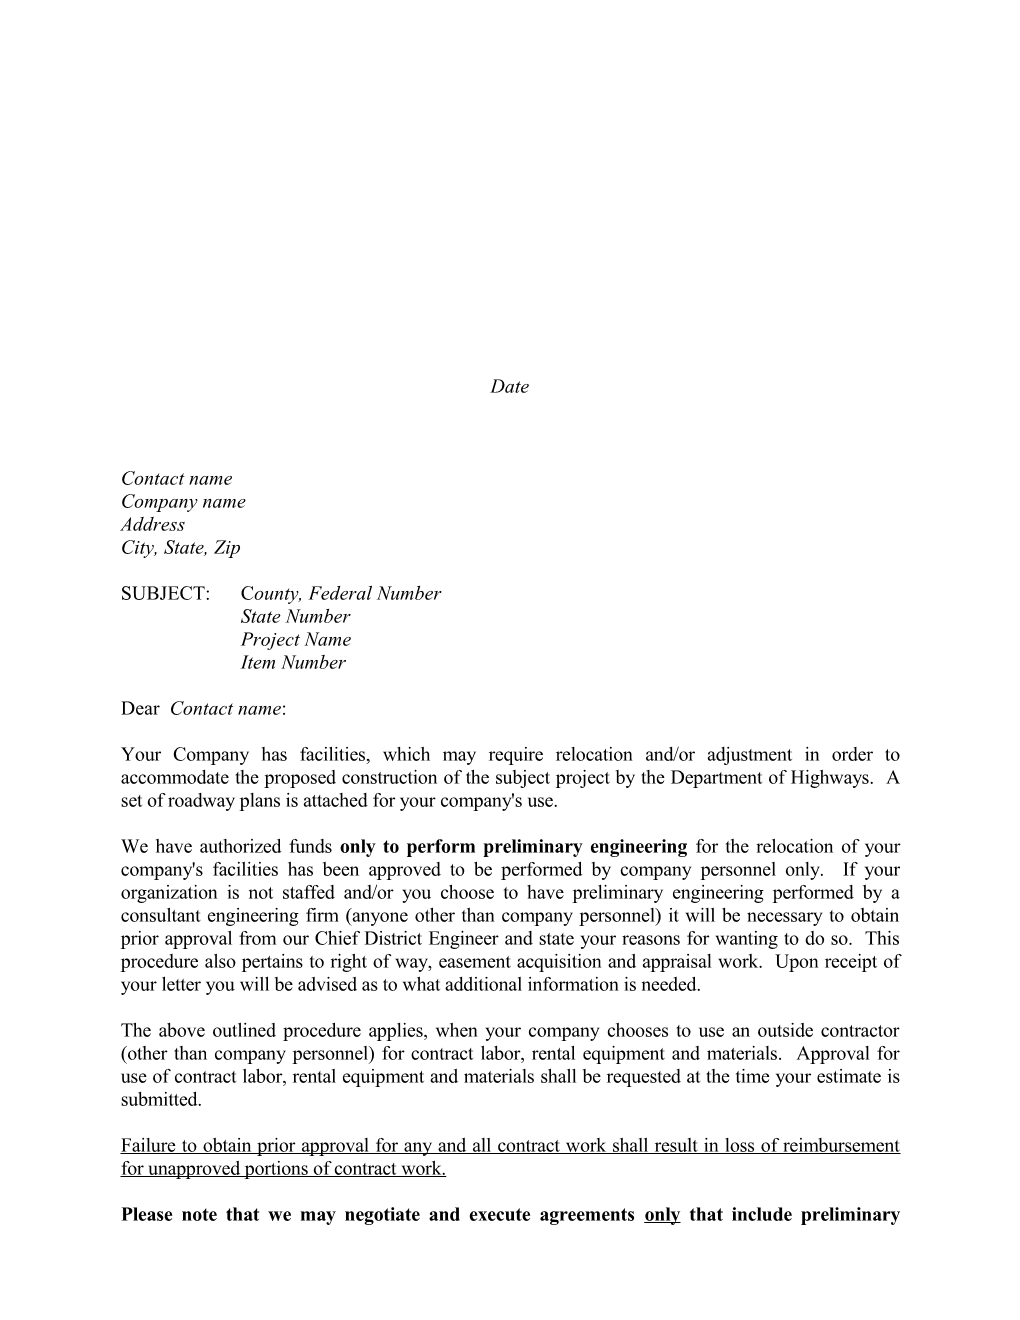 Preliminary Engineering Project Authorization (State) Letter